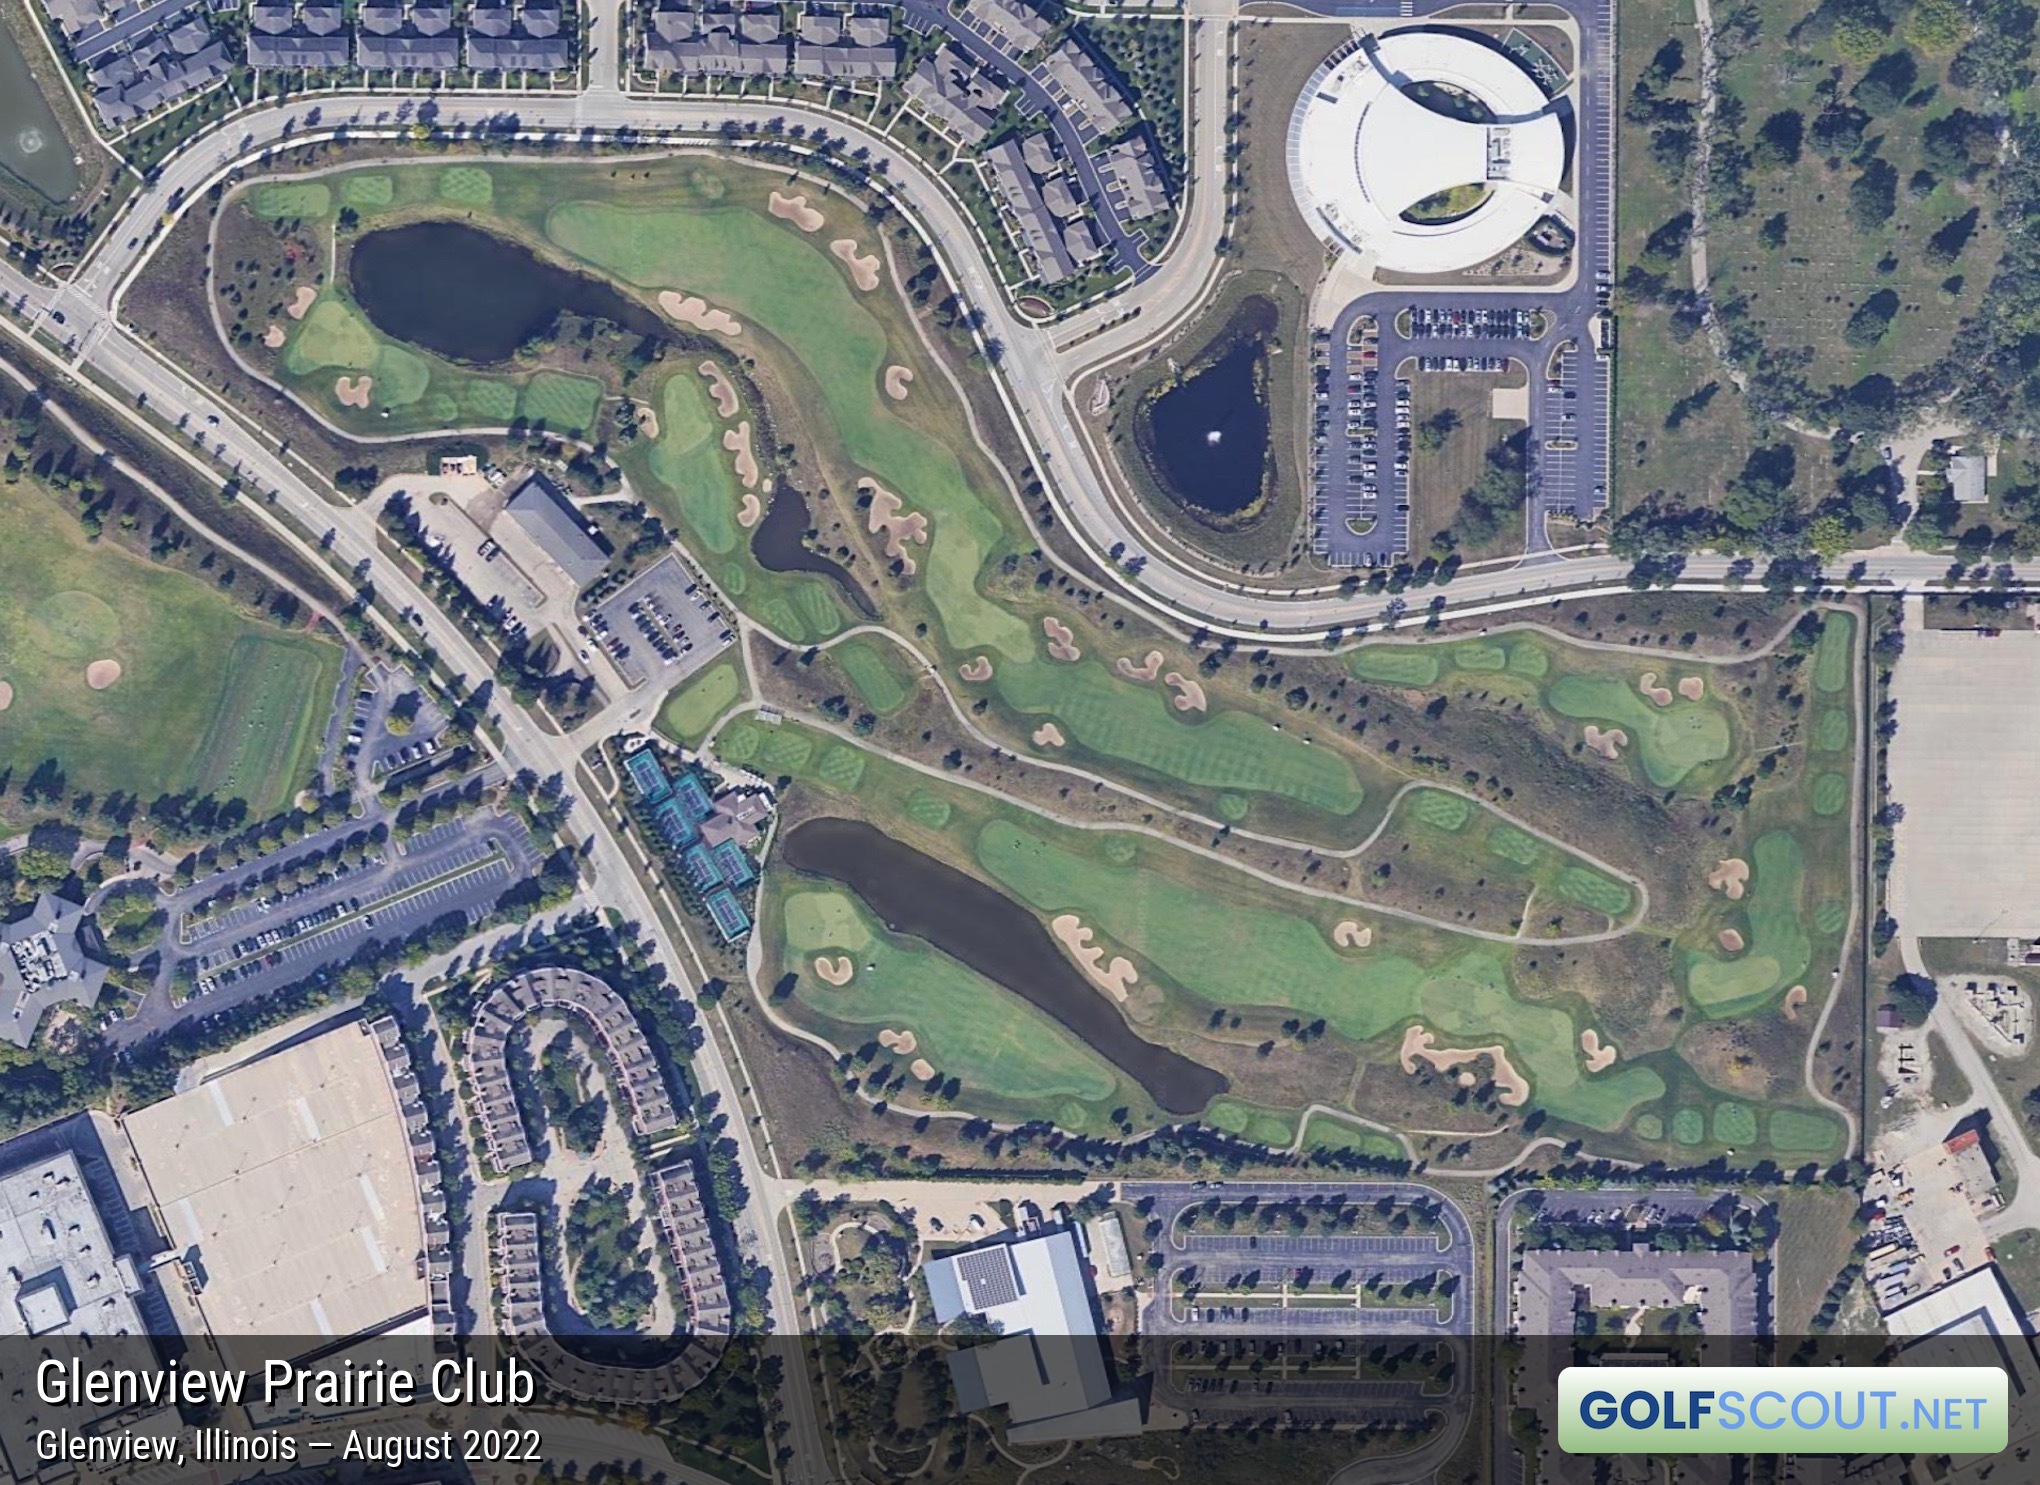 Aerial satellite imagery of Glenview Prairie Club in Glenview, Illinois. 